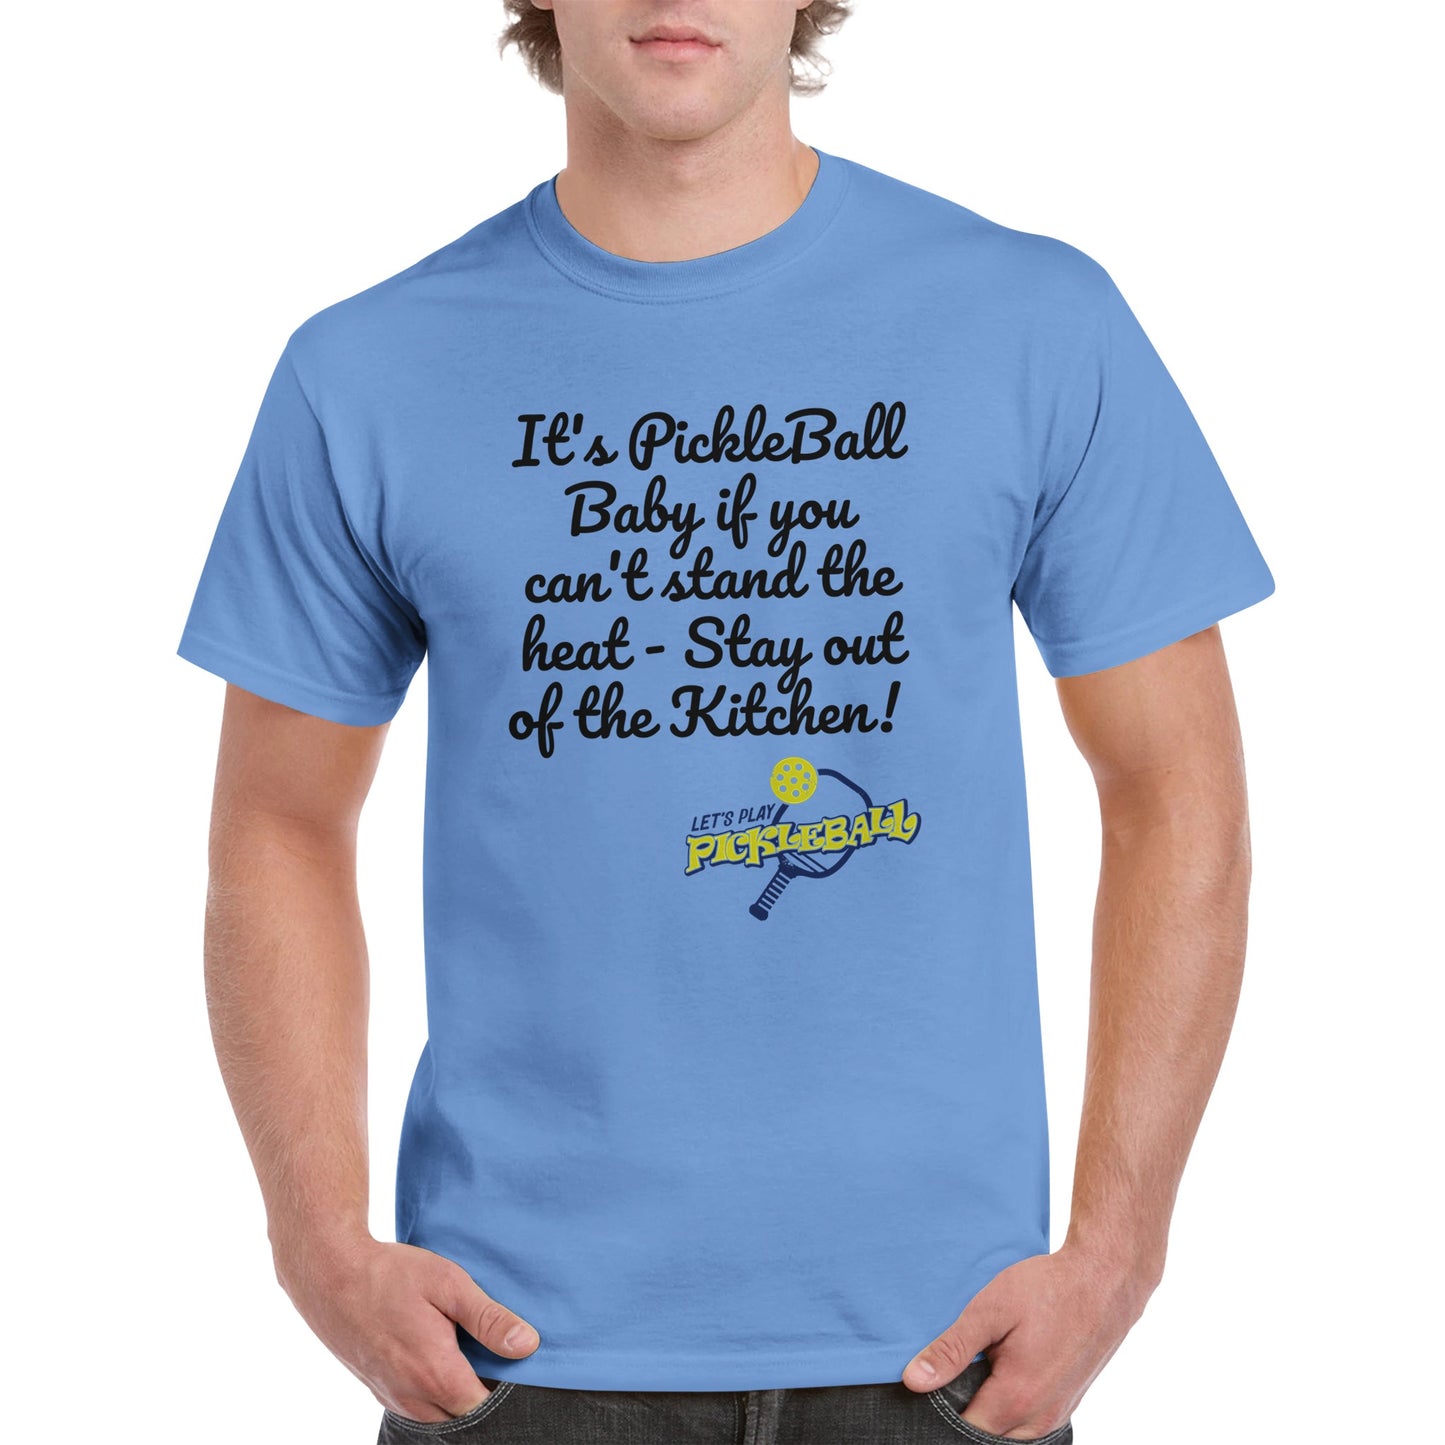 Carolina Blue comfortable Unisex Crewneck heavyweight cotton t-shirt with funny saying It’s PickleBall Baby if can’t stand the heat – Stay out of the Kitchen!  and Let’s Play Pickleball logo on the front from WhatYa Say Apparel worn by blonde-haired male front view.